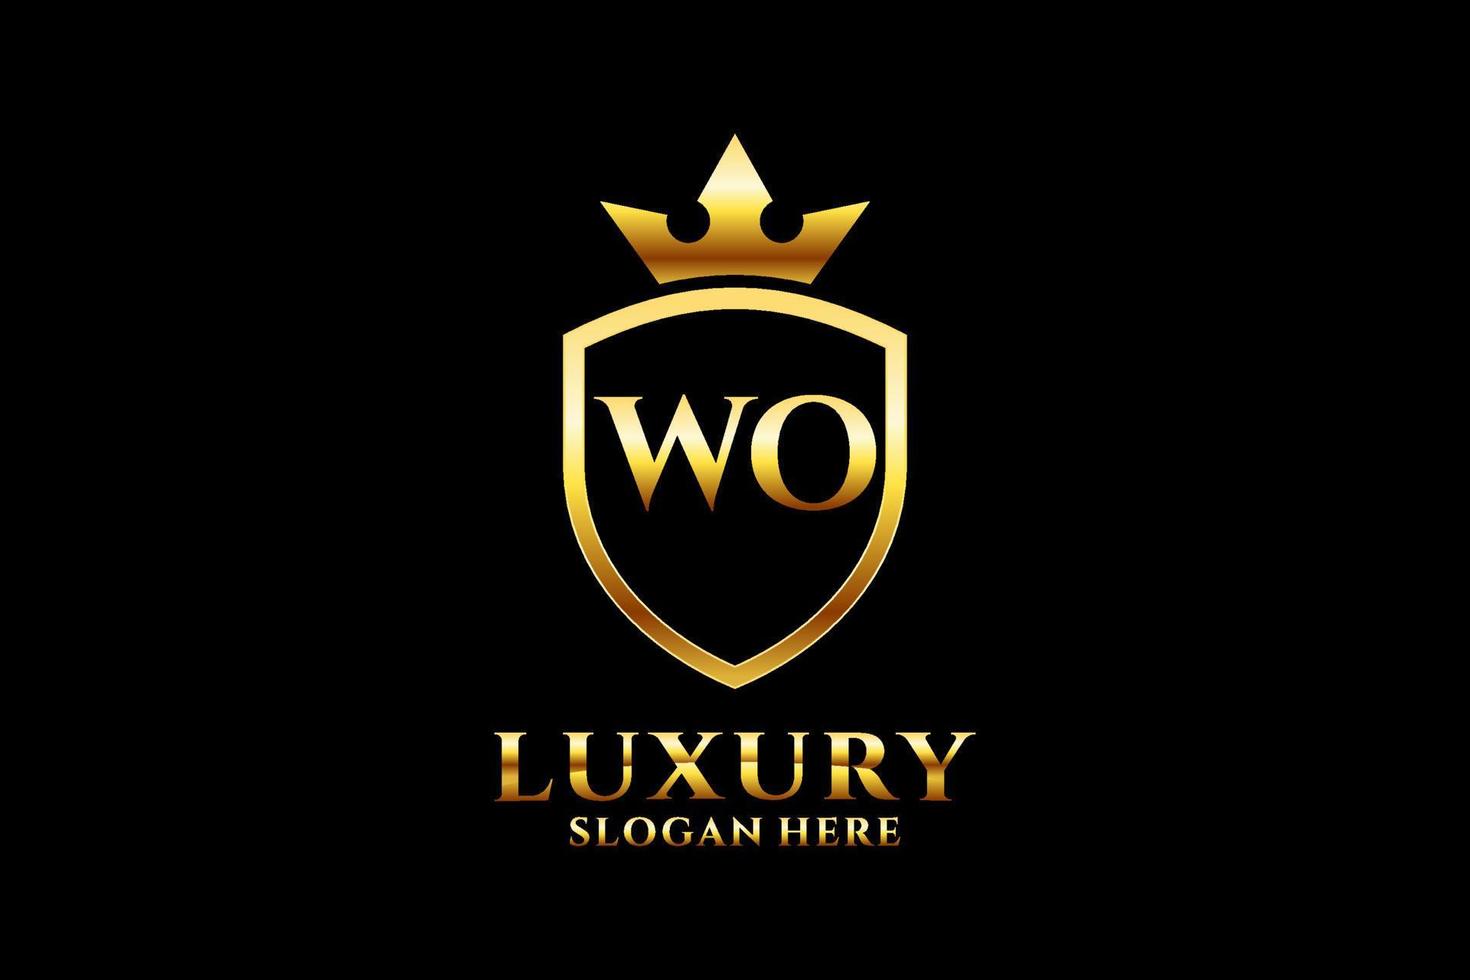 initial WO elegant luxury monogram logo or badge template with scrolls and royal crown - perfect for luxurious branding projects vector